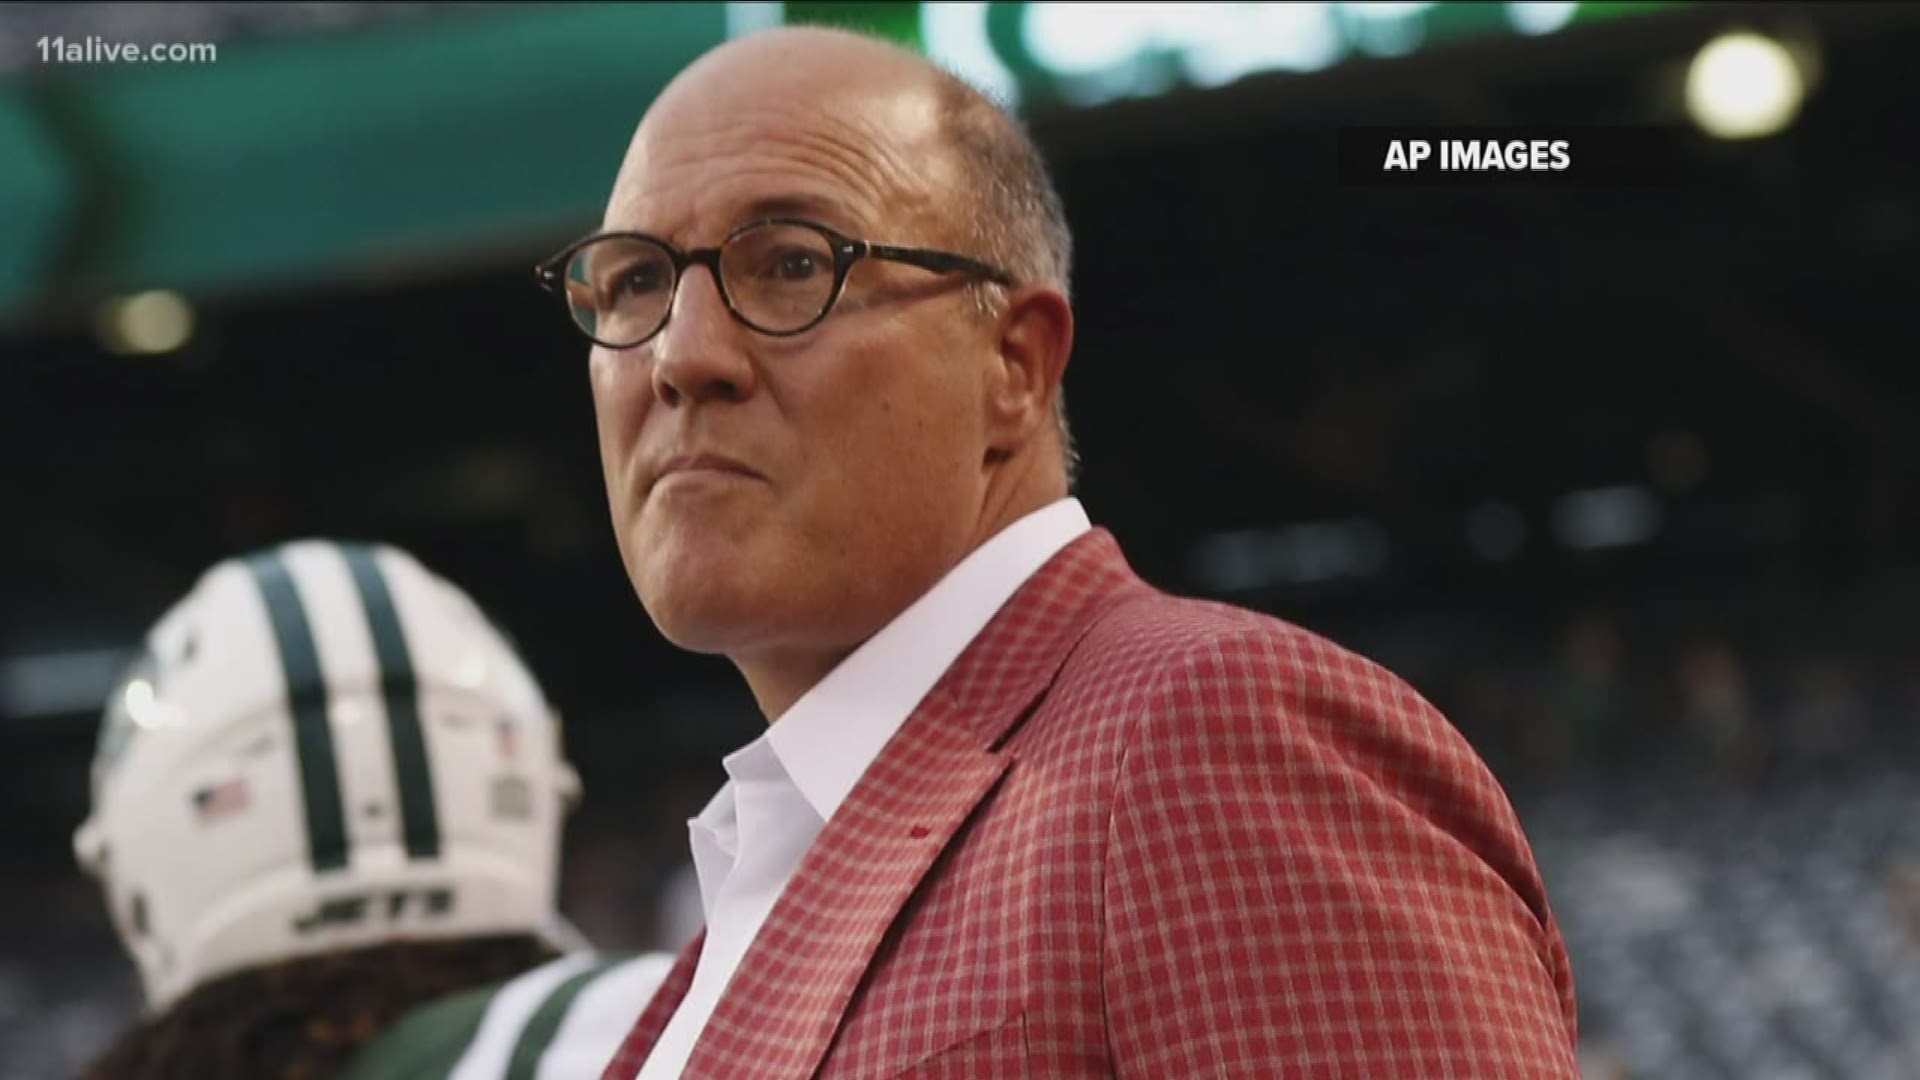 According to a statement from the Falcons, Scott Pioli came to the Falcons in 2014 after four seasons as the general manager of the Kansas City Chiefs.